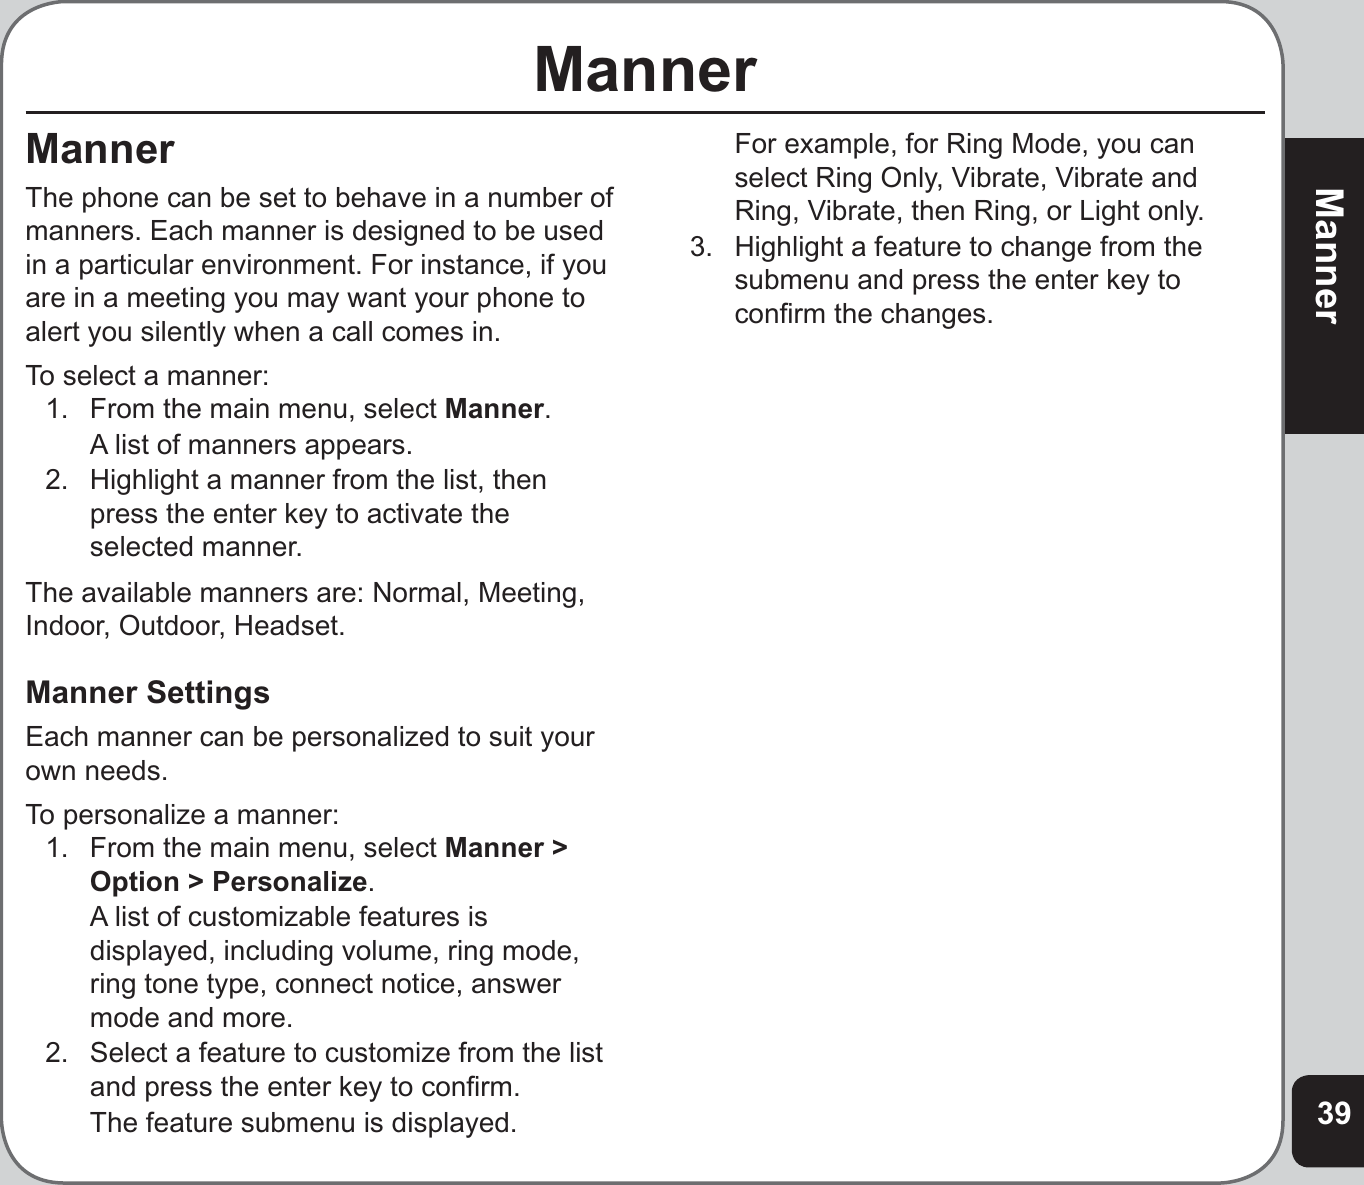 39MannerMannerMannerThe phone can be set to behave in a number of manners. Each manner is designed to be used in a particular environment. For instance, if you are in a meeting you may want your phone to alert you silently when a call comes in.To select a manner:1.  From the main menu, select Manner.A list of manners appears.2.  Highlight a manner from the list, then press the enter key to activate the selected manner.The available manners are: Normal, Meeting, Indoor, Outdoor, Headset.Manner SettingsEach manner can be personalized to suit your own needs.To personalize a manner:1.  From the main menu, select Manner &gt; Option &gt; Personalize.  A list of customizable features is displayed, including volume, ring mode, ring tone type, connect notice, answer mode and more.2.  Select a feature to customize from the list and press the enter key to conﬁ rm.  The feature submenu is displayed.  For example, for Ring Mode, you can select Ring Only, Vibrate, Vibrate and Ring, Vibrate, then Ring, or Light only. 3.  Highlight a feature to change from the submenu and press the enter key to conﬁ rm the changes.